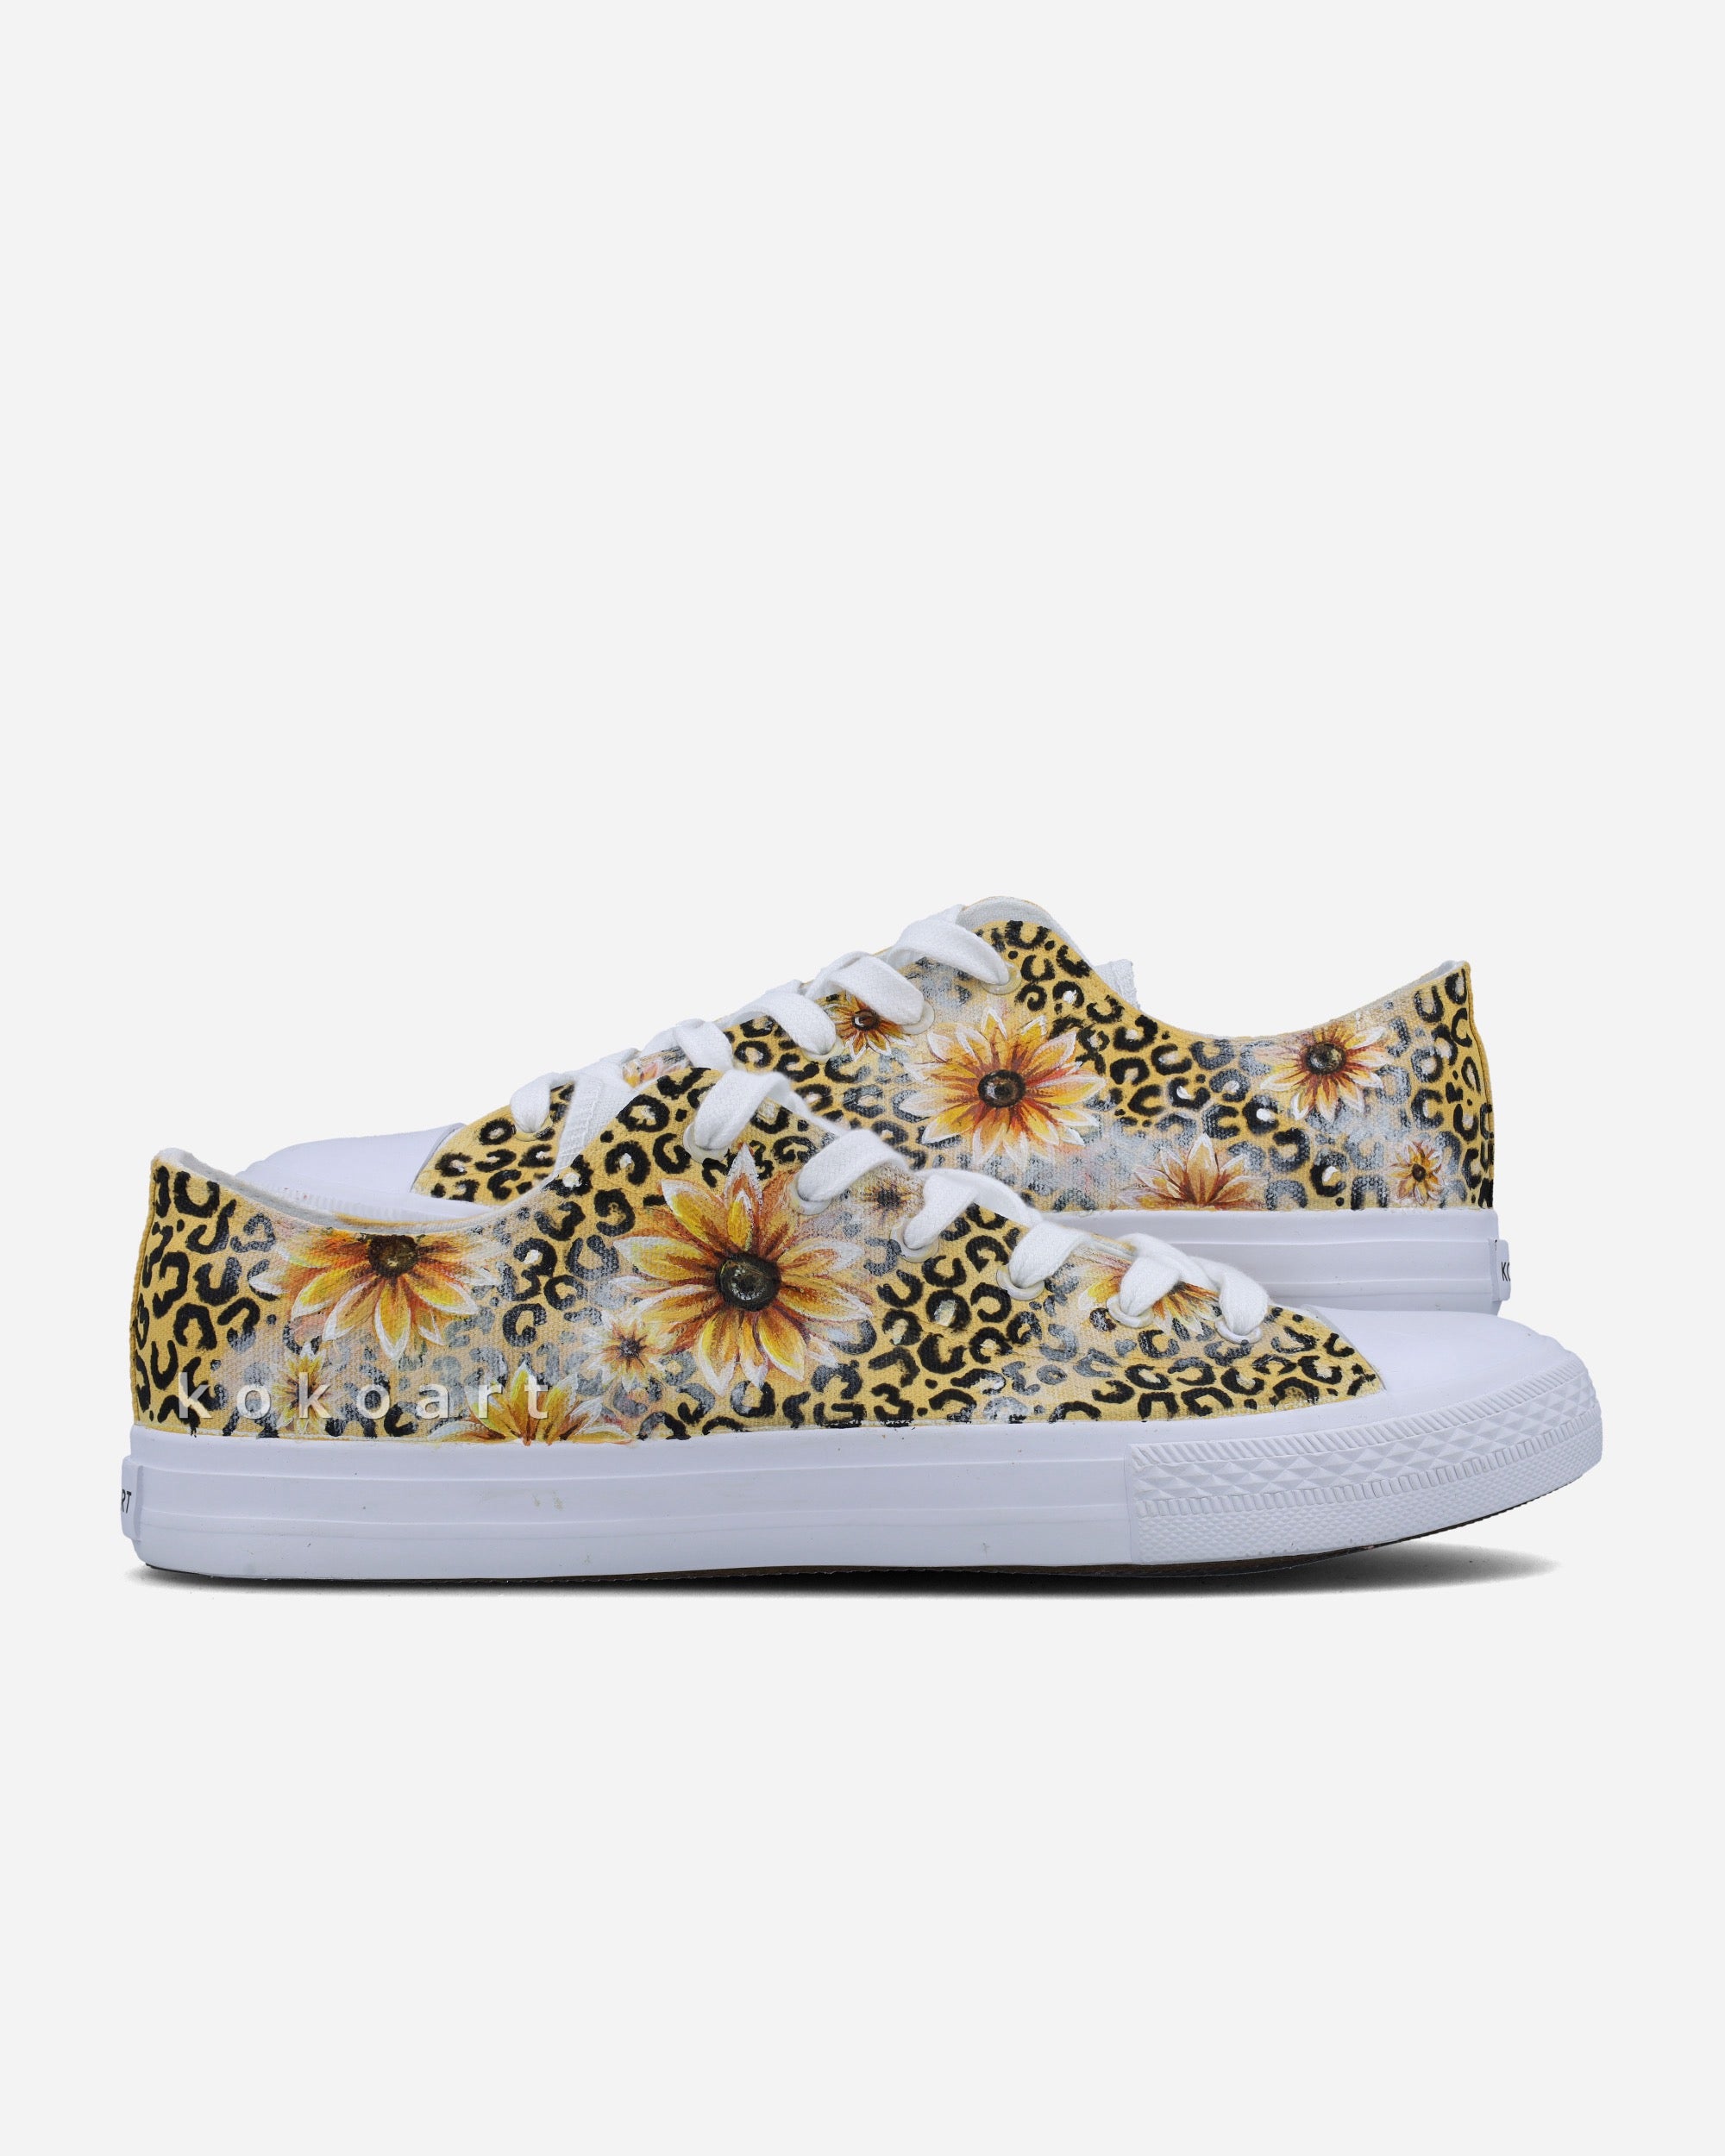 Leopard Print and Sunflowers Hand Painted Shoes